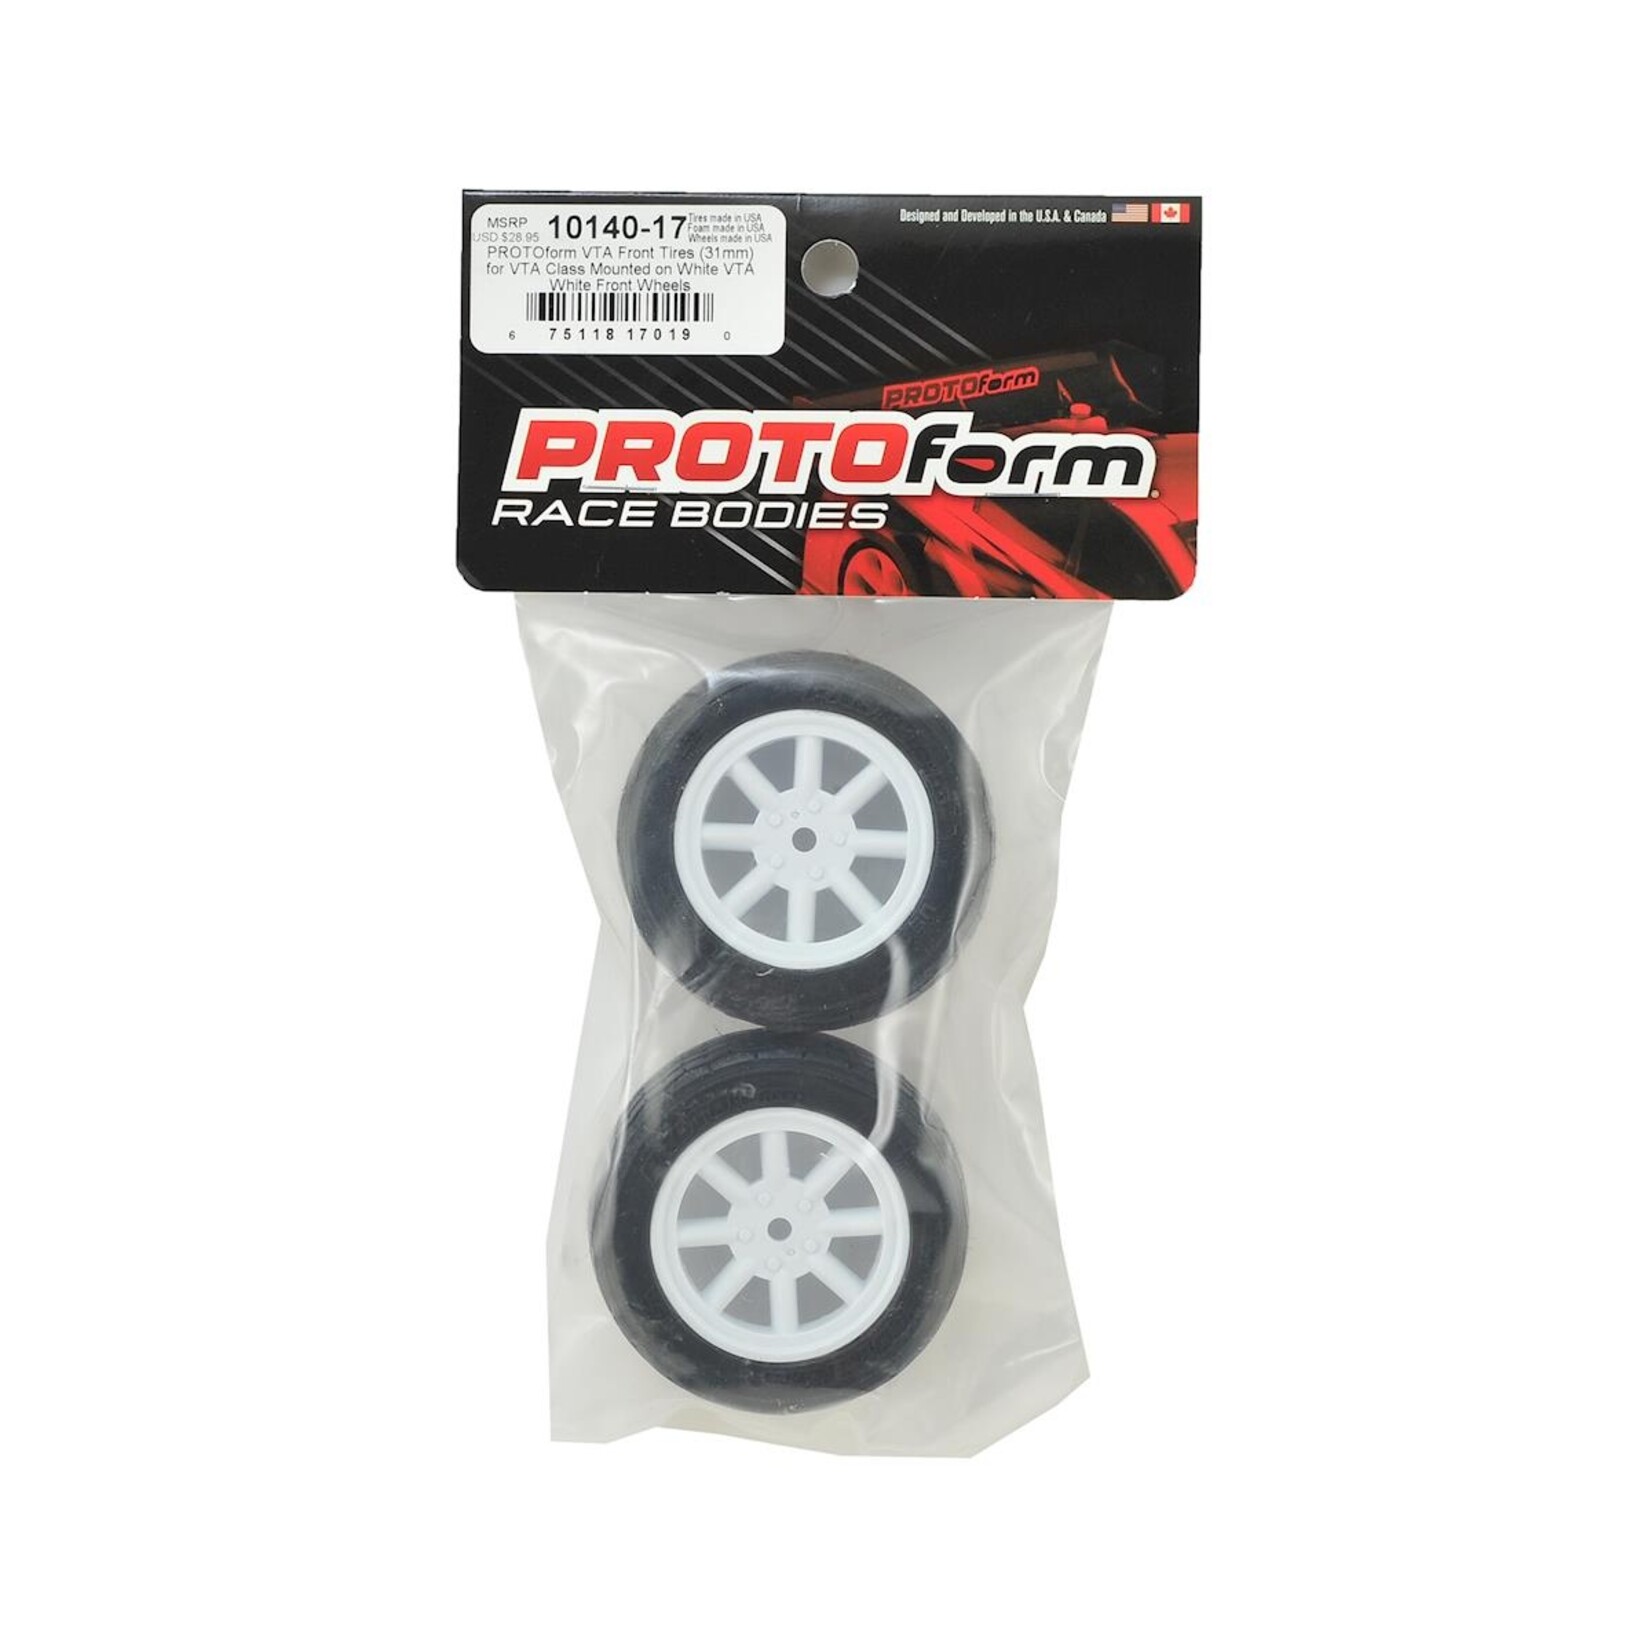 PROTOform PROTOform Vintage Racing Pre-Mounted Front Tire (2) (26mm) (White) #10140-17